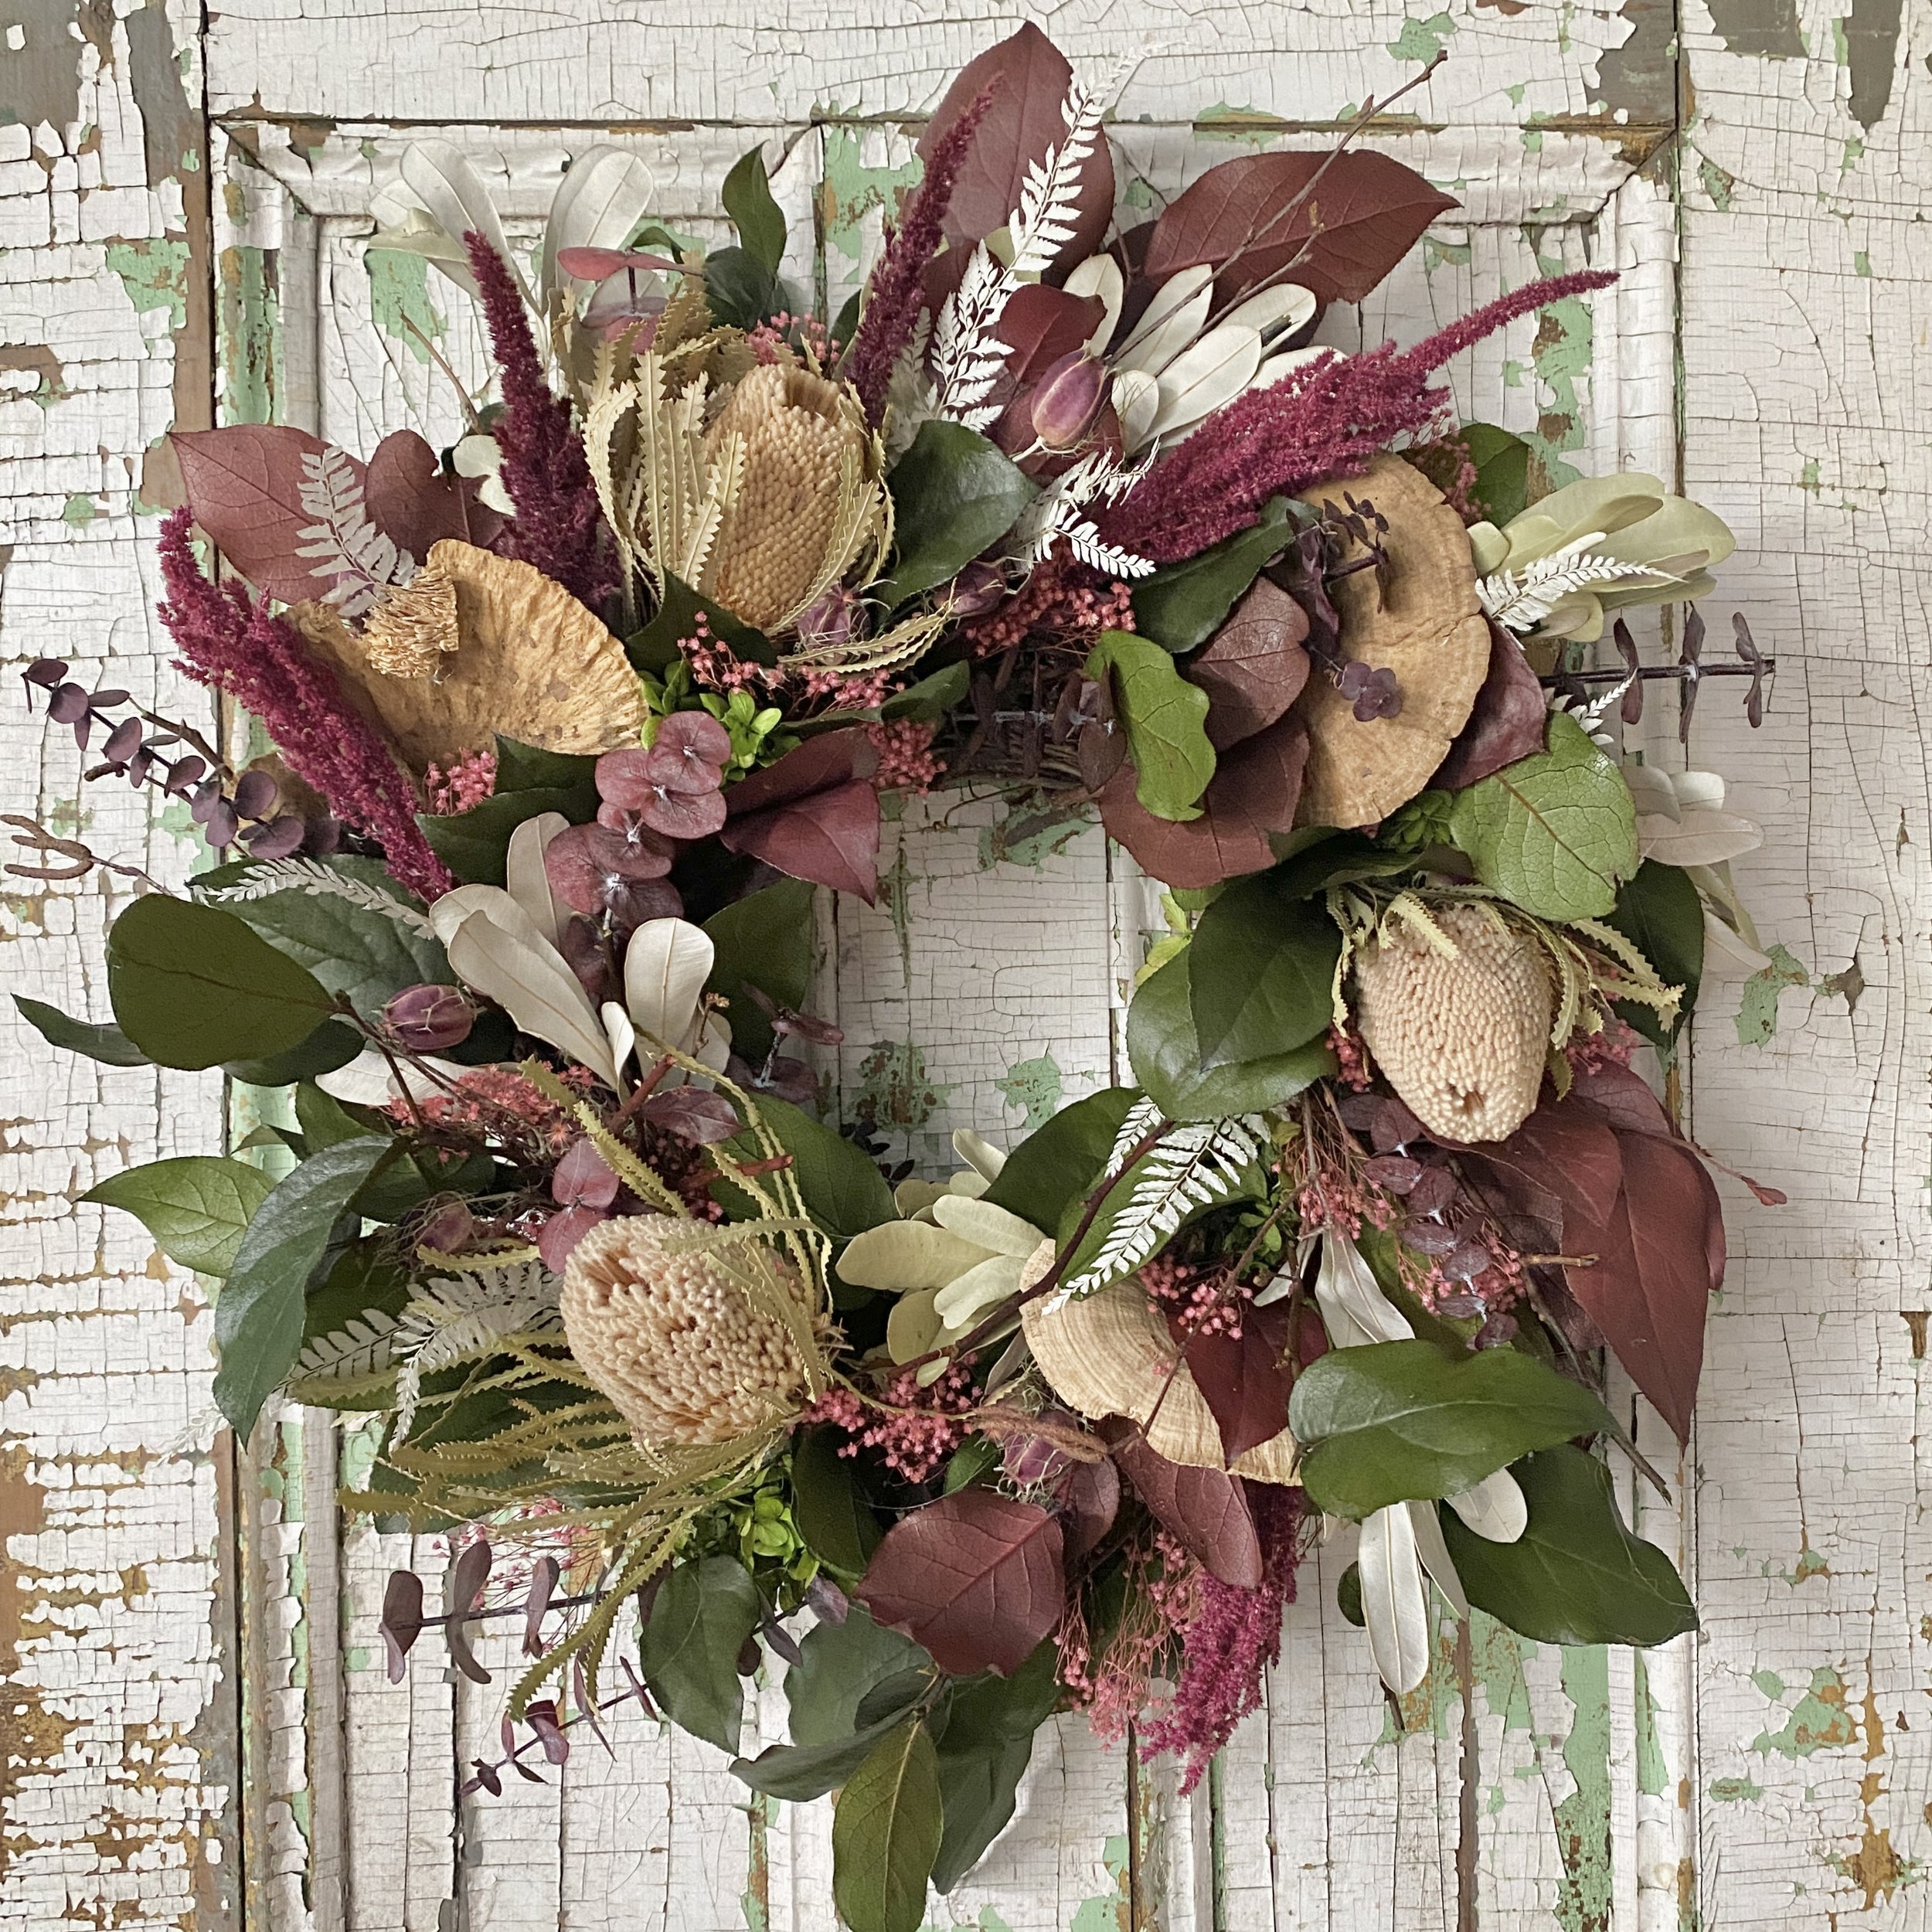 Wild Dried Flower Wreath with Banksia and Sponge Mushrooms